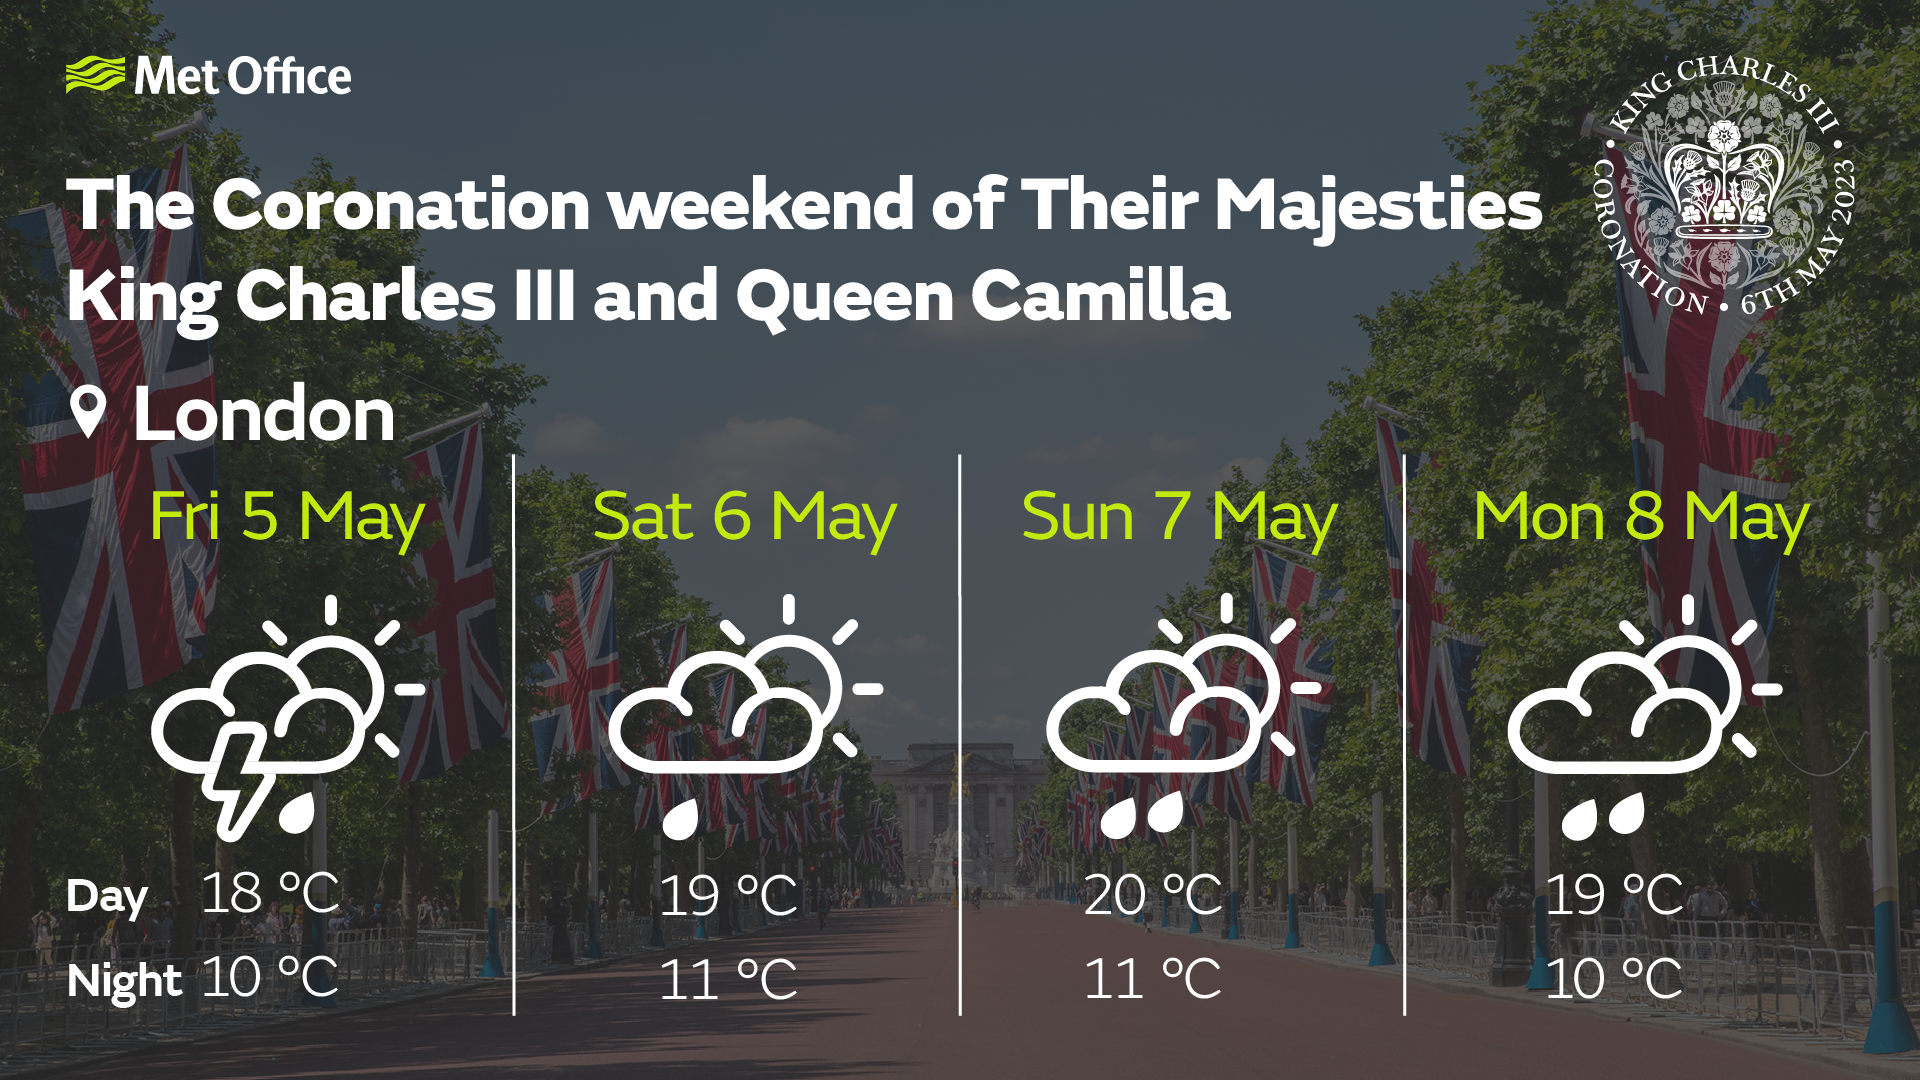 Image showing forecast symbols for London for the Coronation. Friday 5 May Thundery showers, highs of 18 degrees and lows of 10 degrees. Saturday 6 May sunshine and showers, highs of 19 degrees, lows of 11 degrees. Sunday 7 May sunshine and heavy showers, highs of 20 degrees, lows of 11 degrees. Monday 8 May sunshine and heavy showers, highs of 19 degrees, lows of 10 degrees.